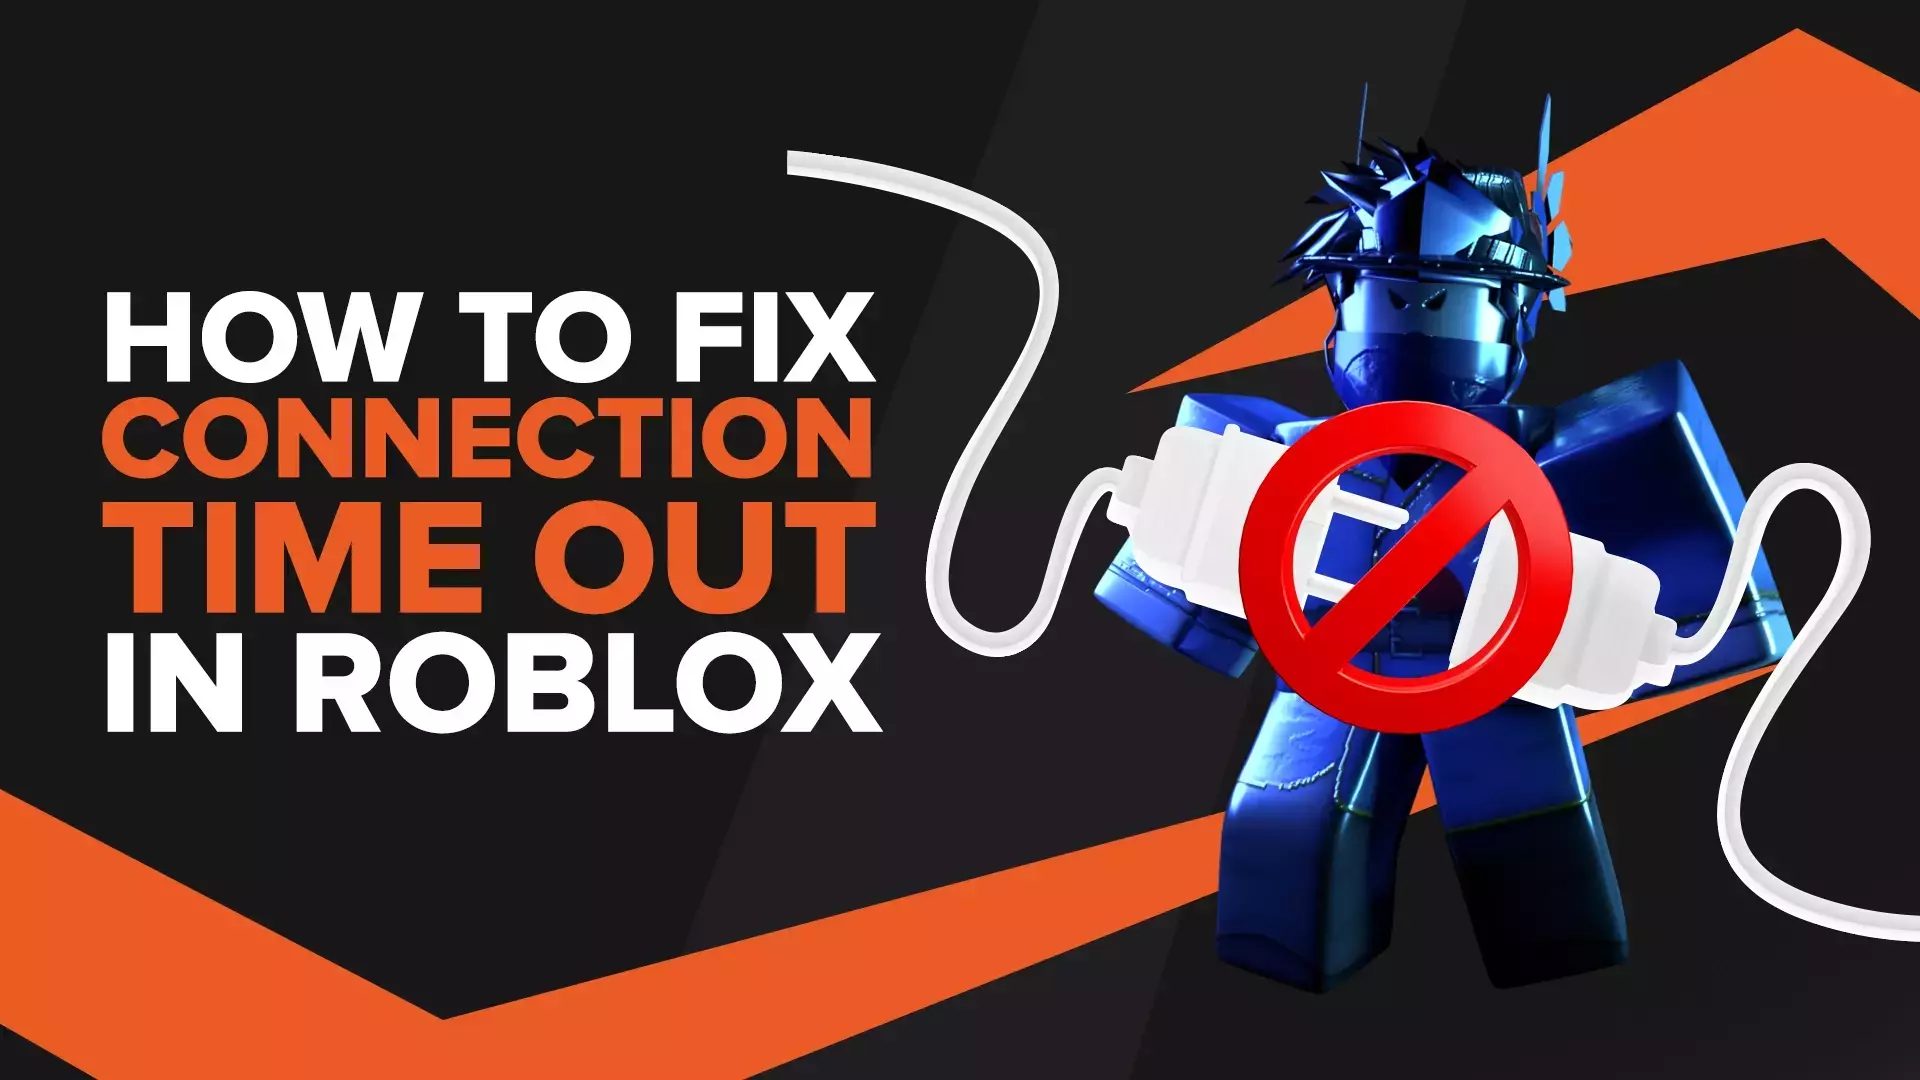 How to Fix Roblox Connection Timed Out Quickly [9 Working Methods]